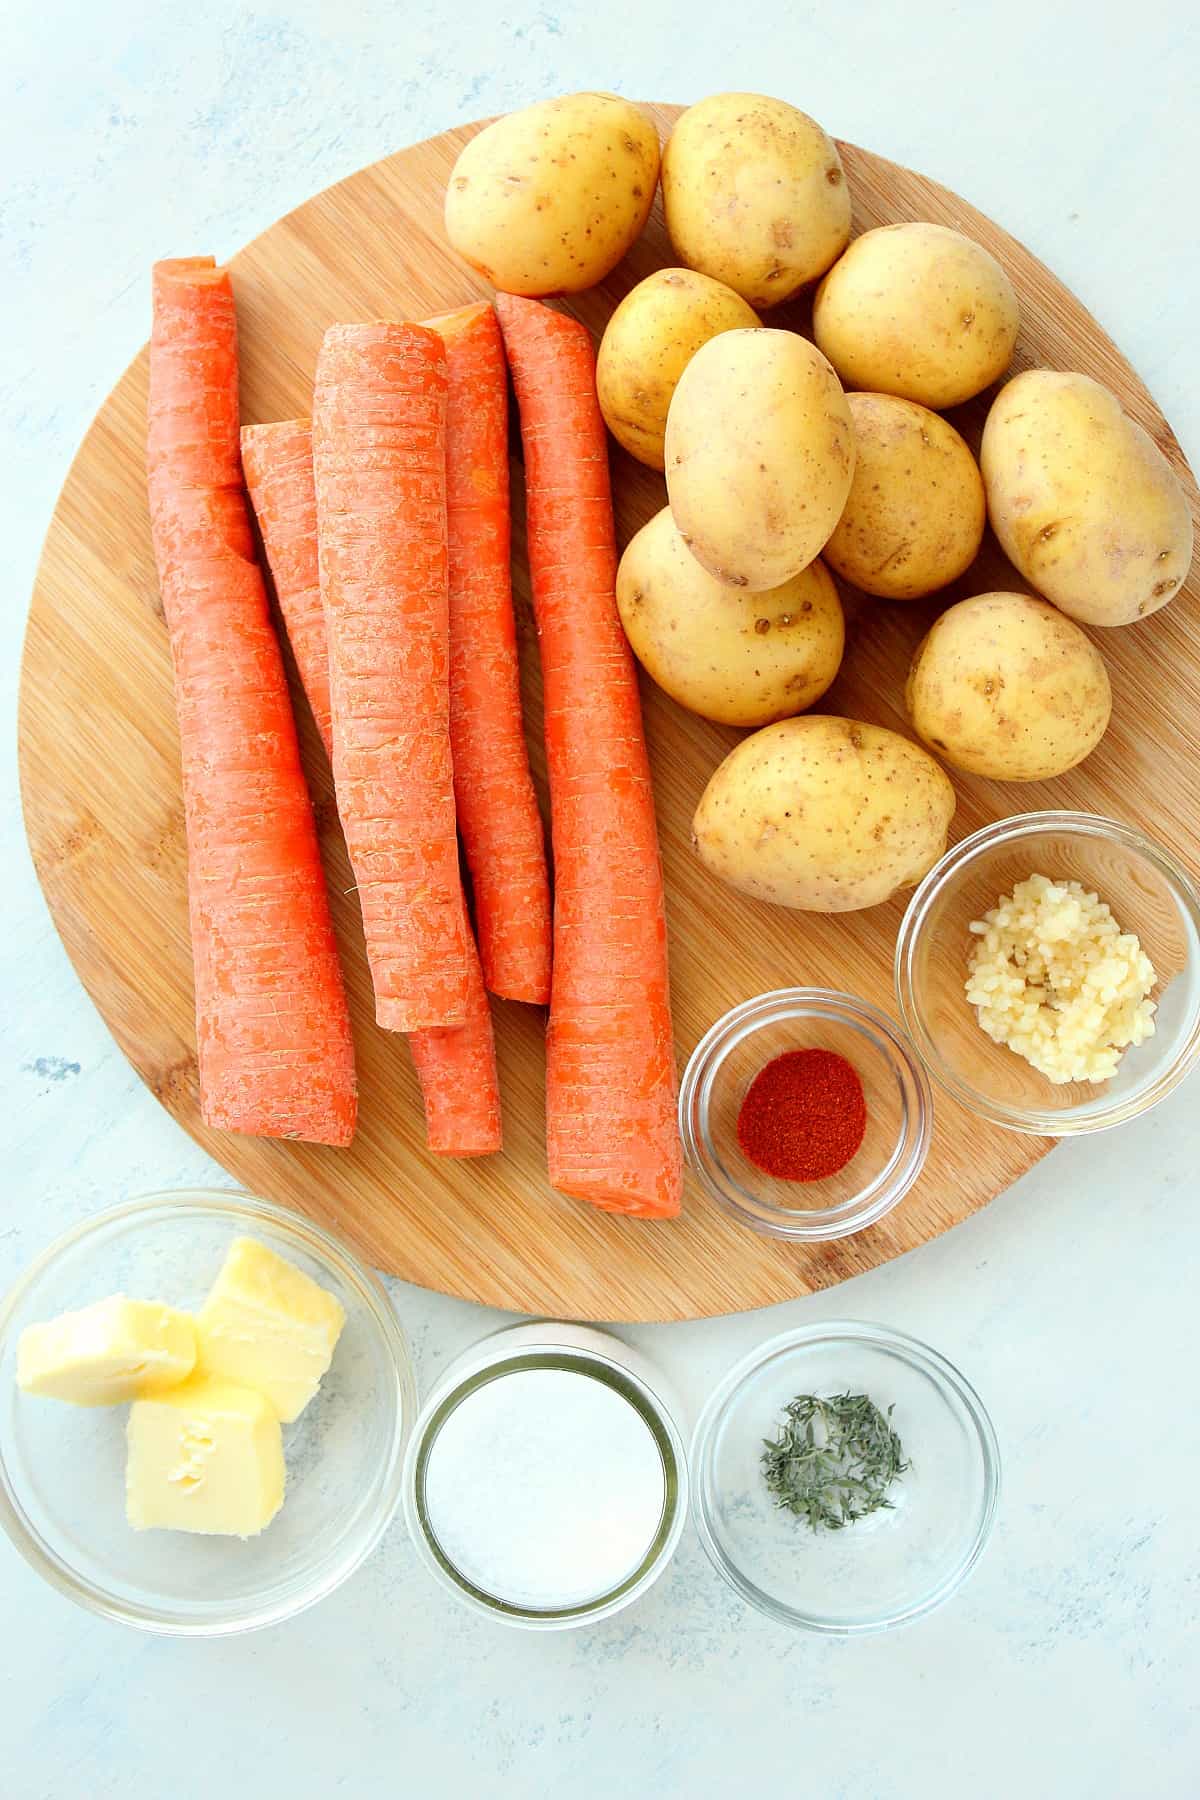 roasted potatoes and carrots ingredients Roasted Potatoes and Carrots